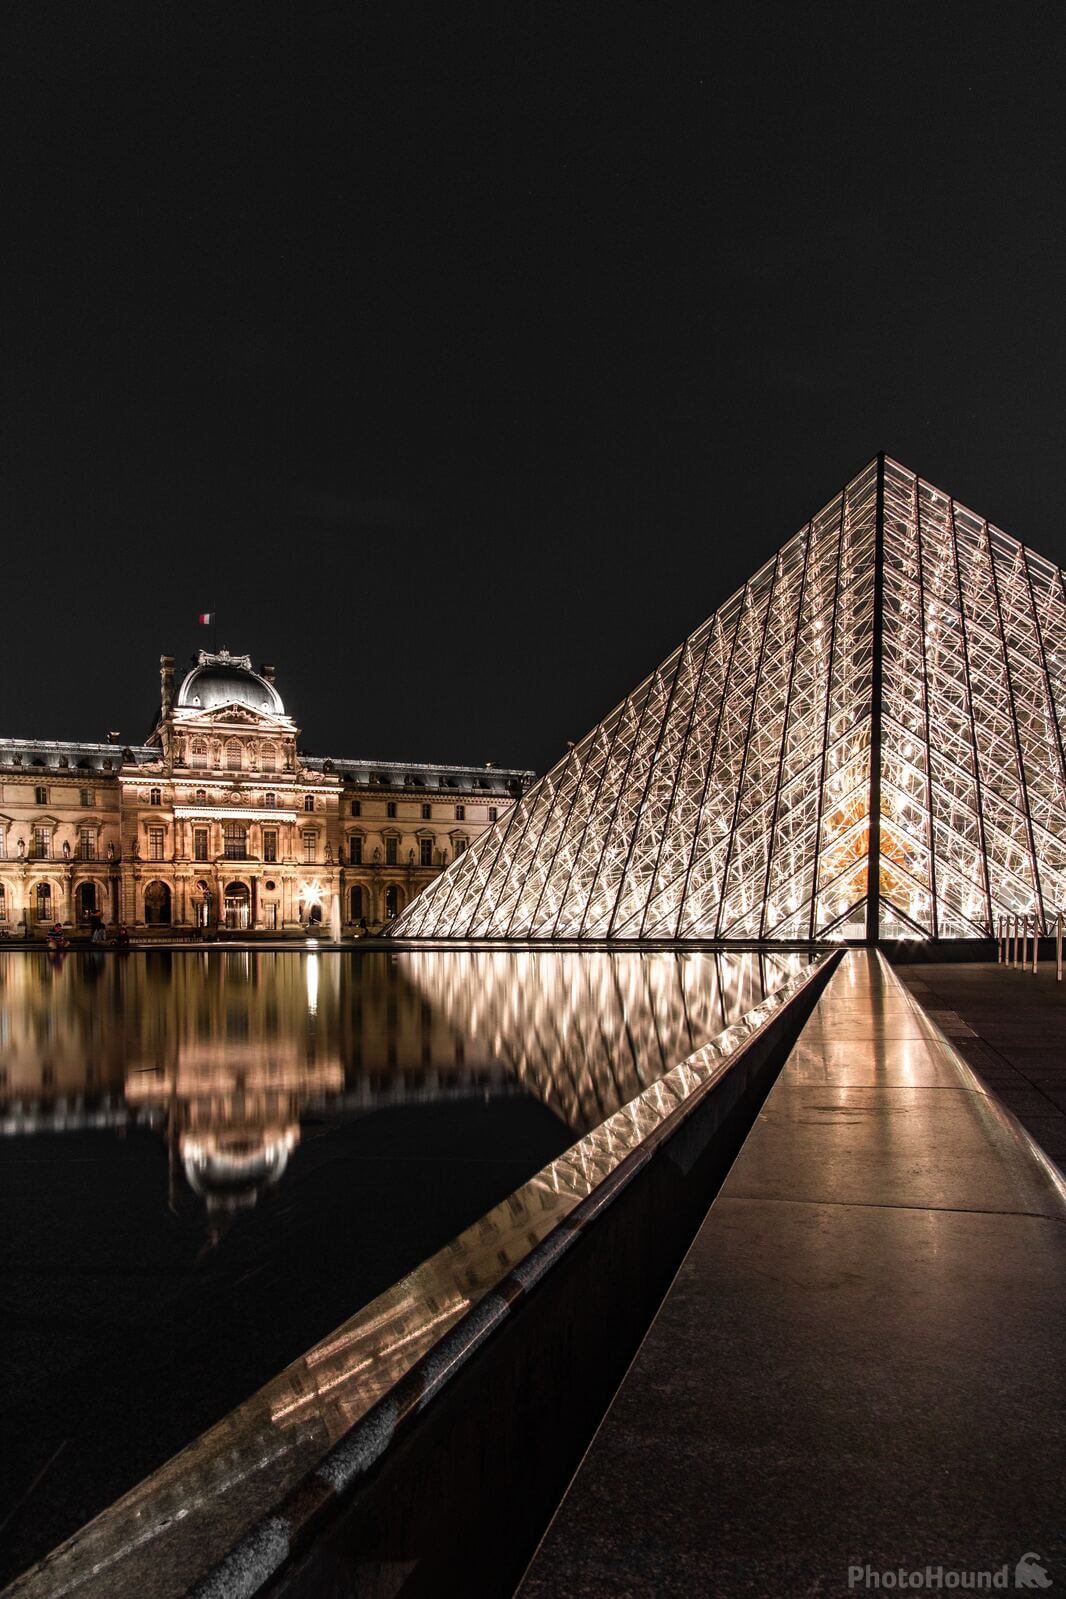 Image of Pyramide du Louvre (Louvre Exterior) by Team PhotoHound